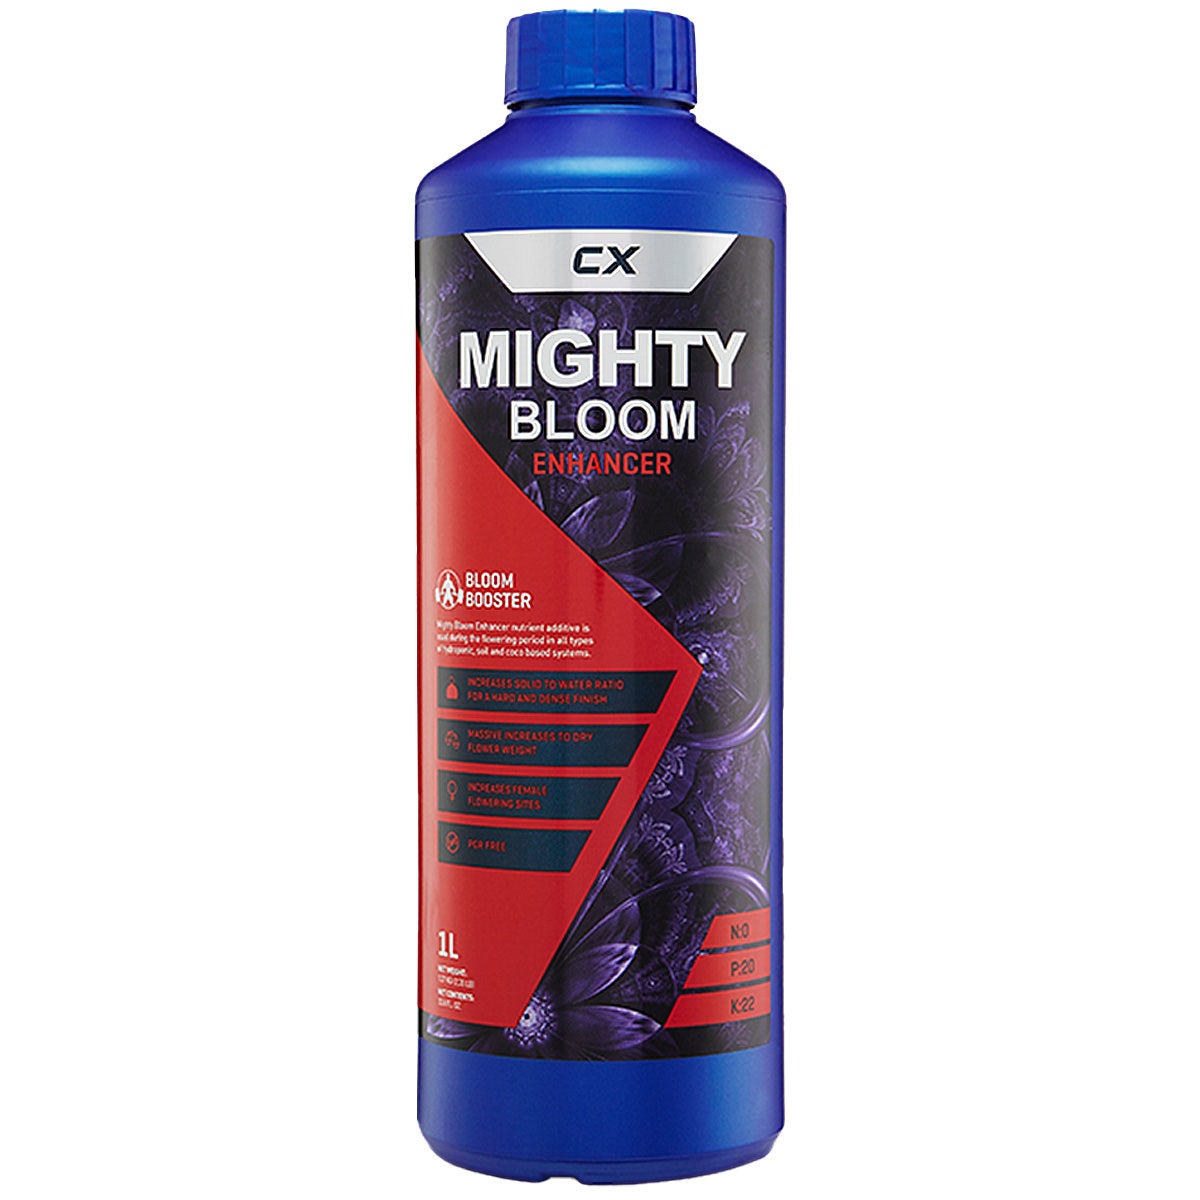 CX Horticulture - Mighty Bloom Enhancer